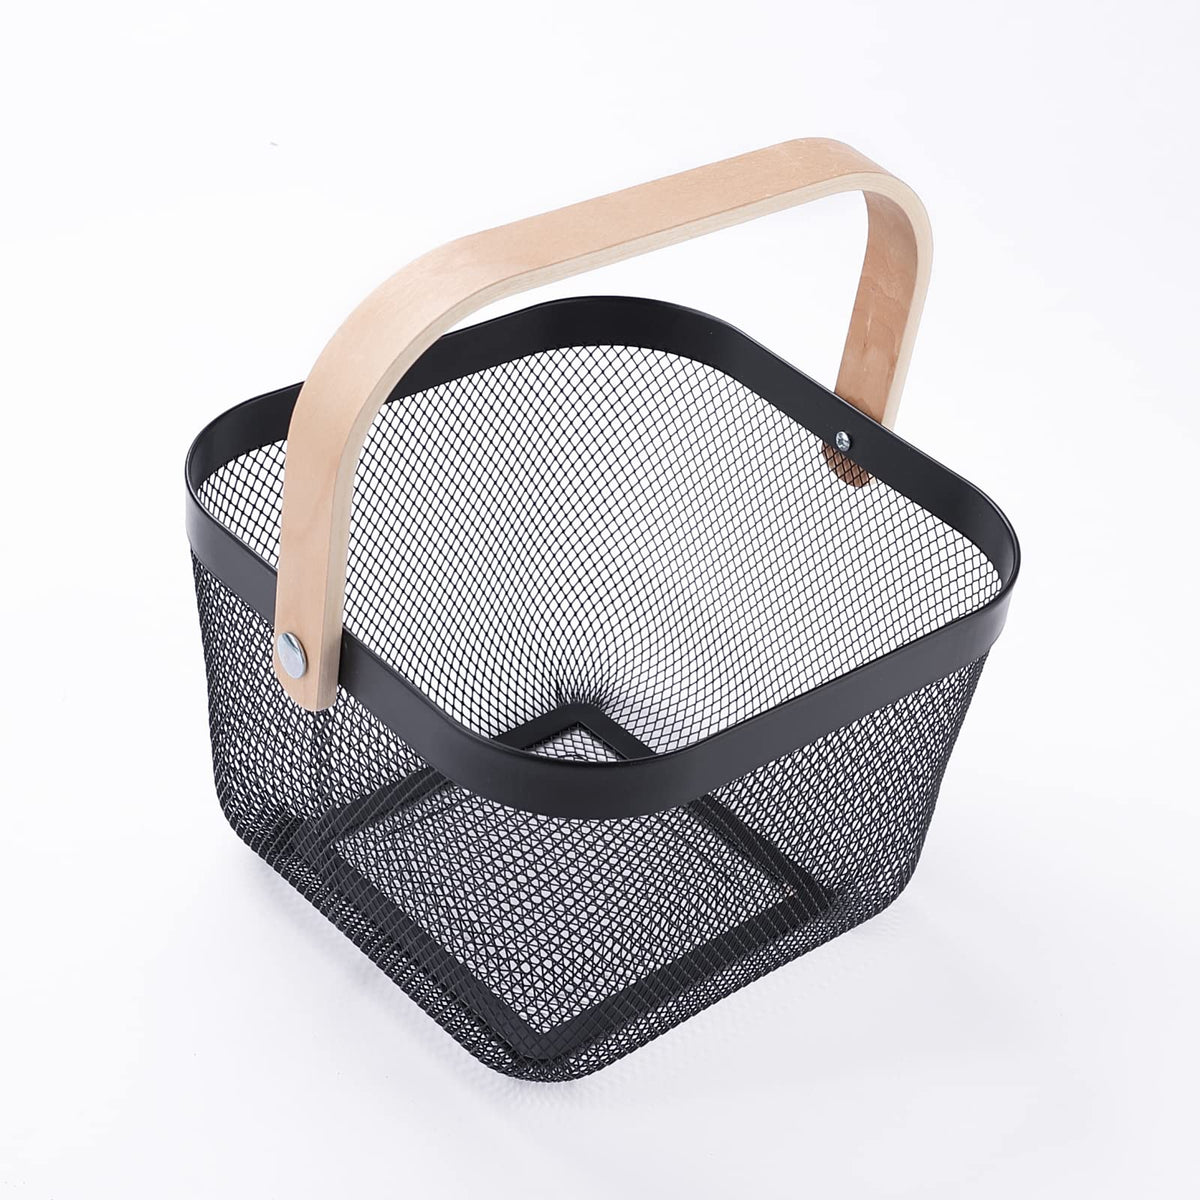 Metal Mesh Storage Basket with Wooden Handle | Ideal for Storage, Shopping, Picnics and More (Black)